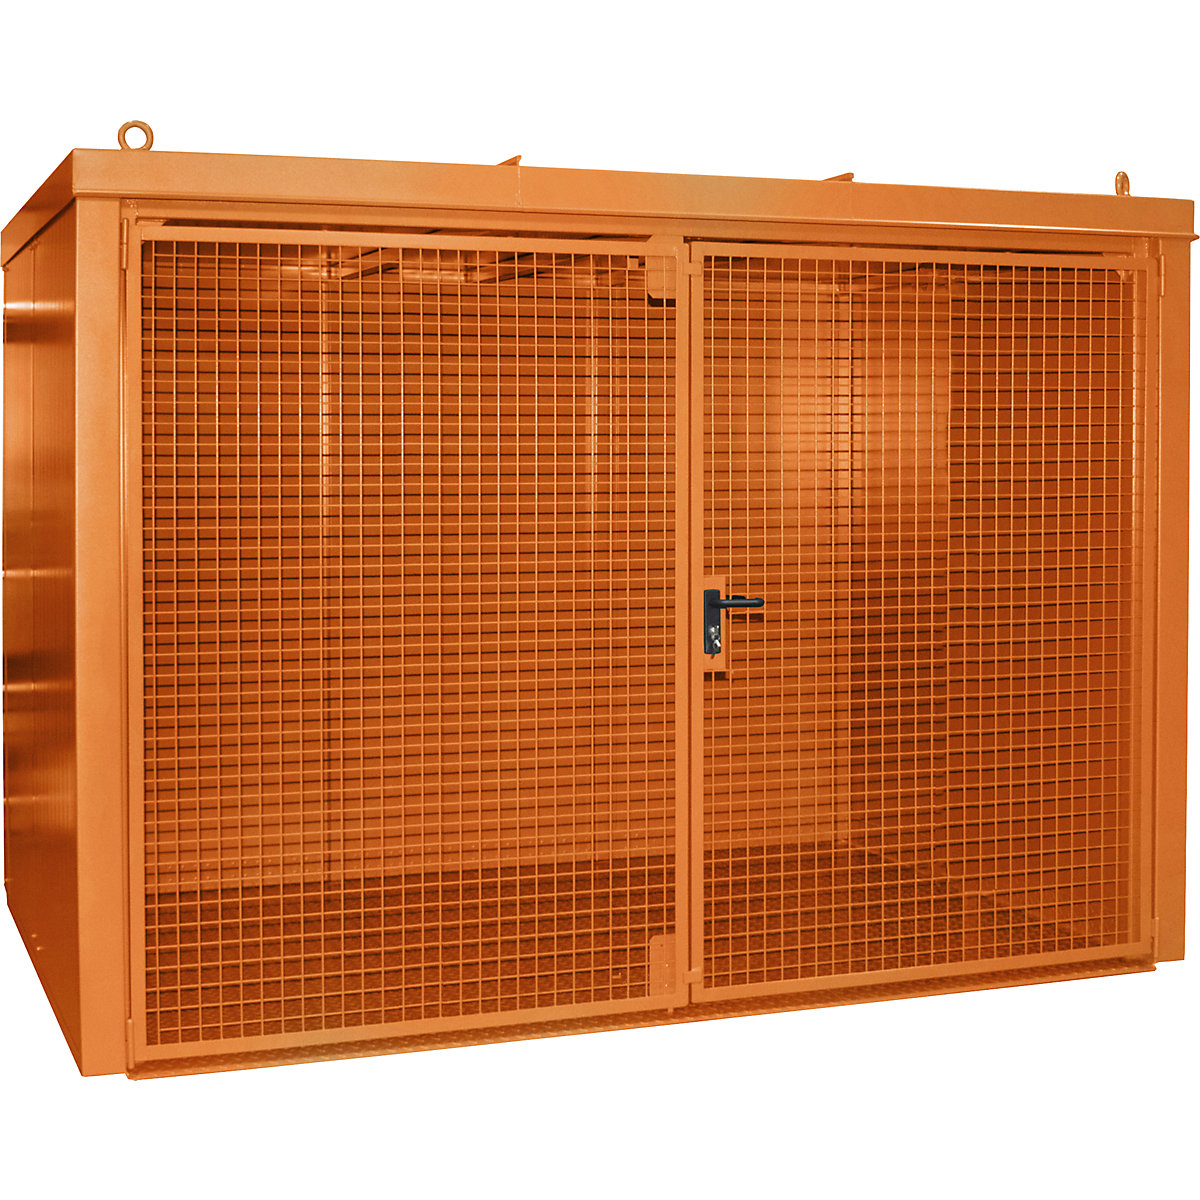 Gas cylinder container, fire resistant – eurokraft pro, for 60 cylinders with Ø 230 mm, orange-2